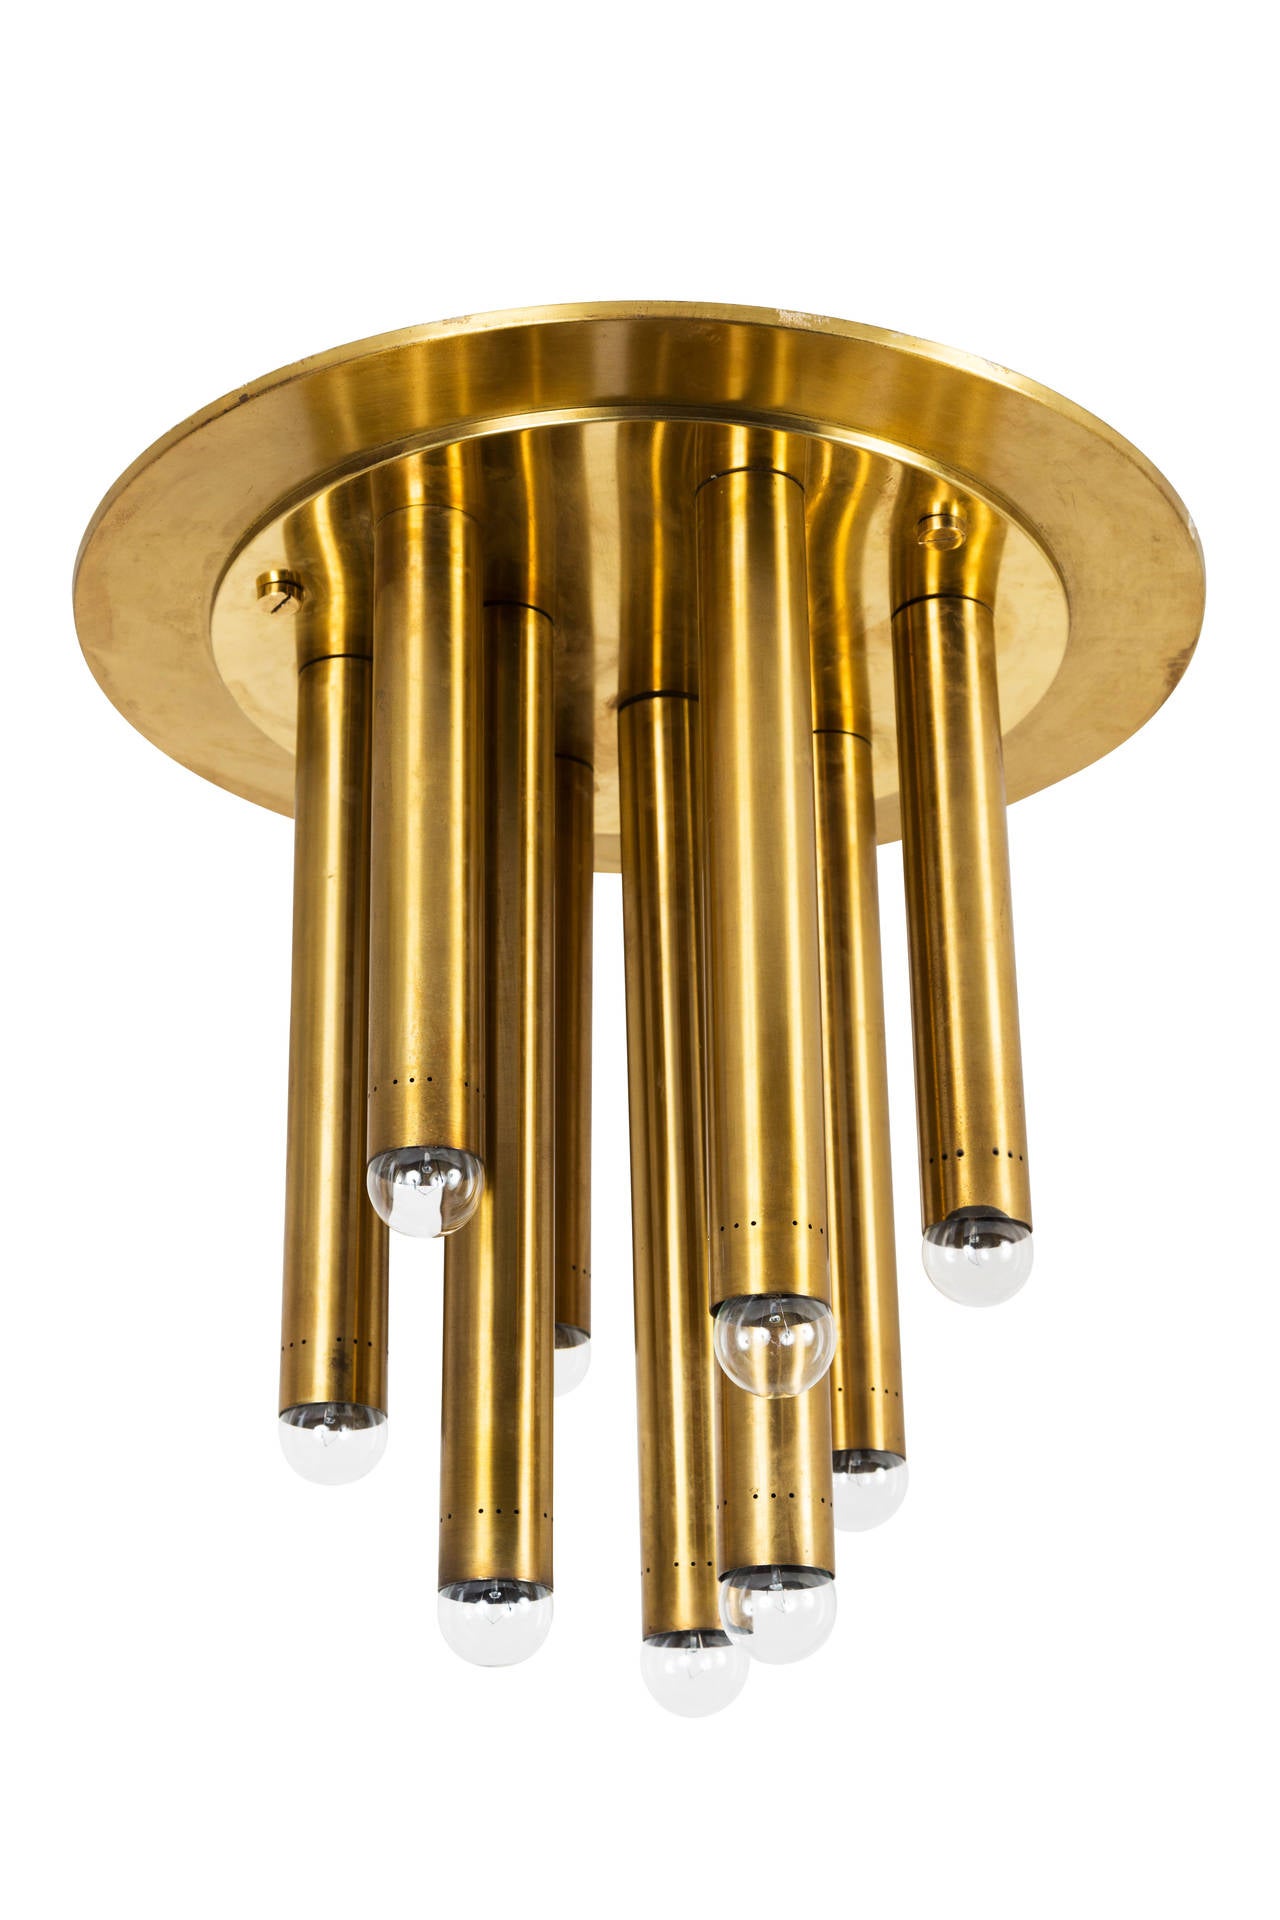 Single brass ceiling lights with nine brass cylinders per light. Small perforated detail at the base of each cylinder. E27 15w maximum bulb per socket. Retains original manufacturers label.